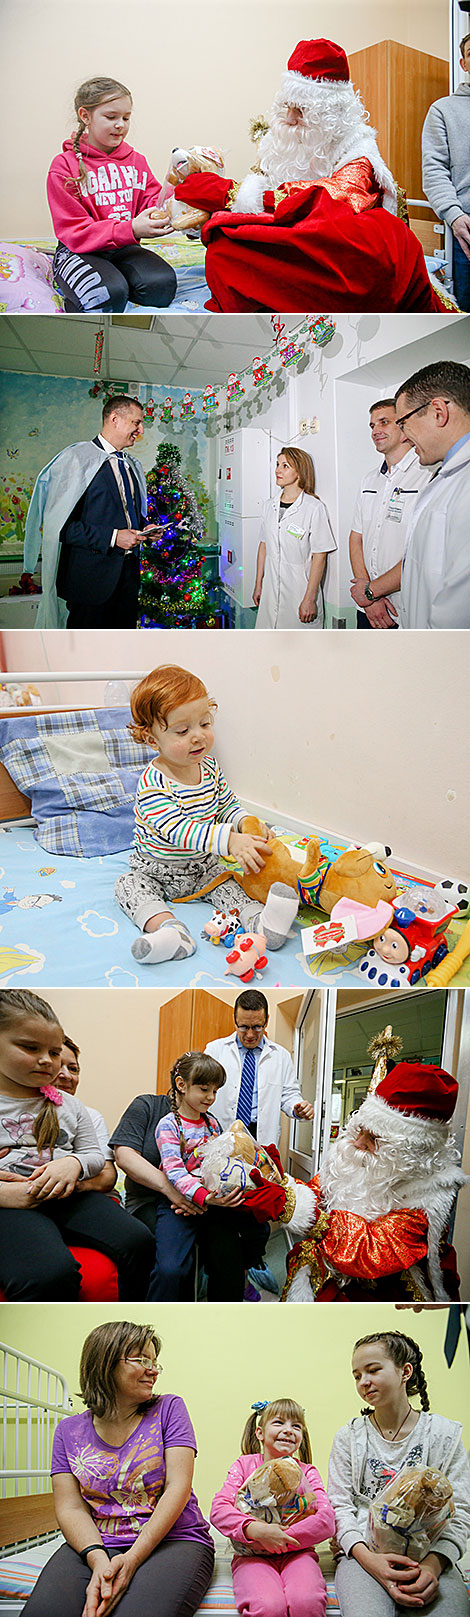 Our Children in the Minsk Children's Surgery Applied Research Hospital